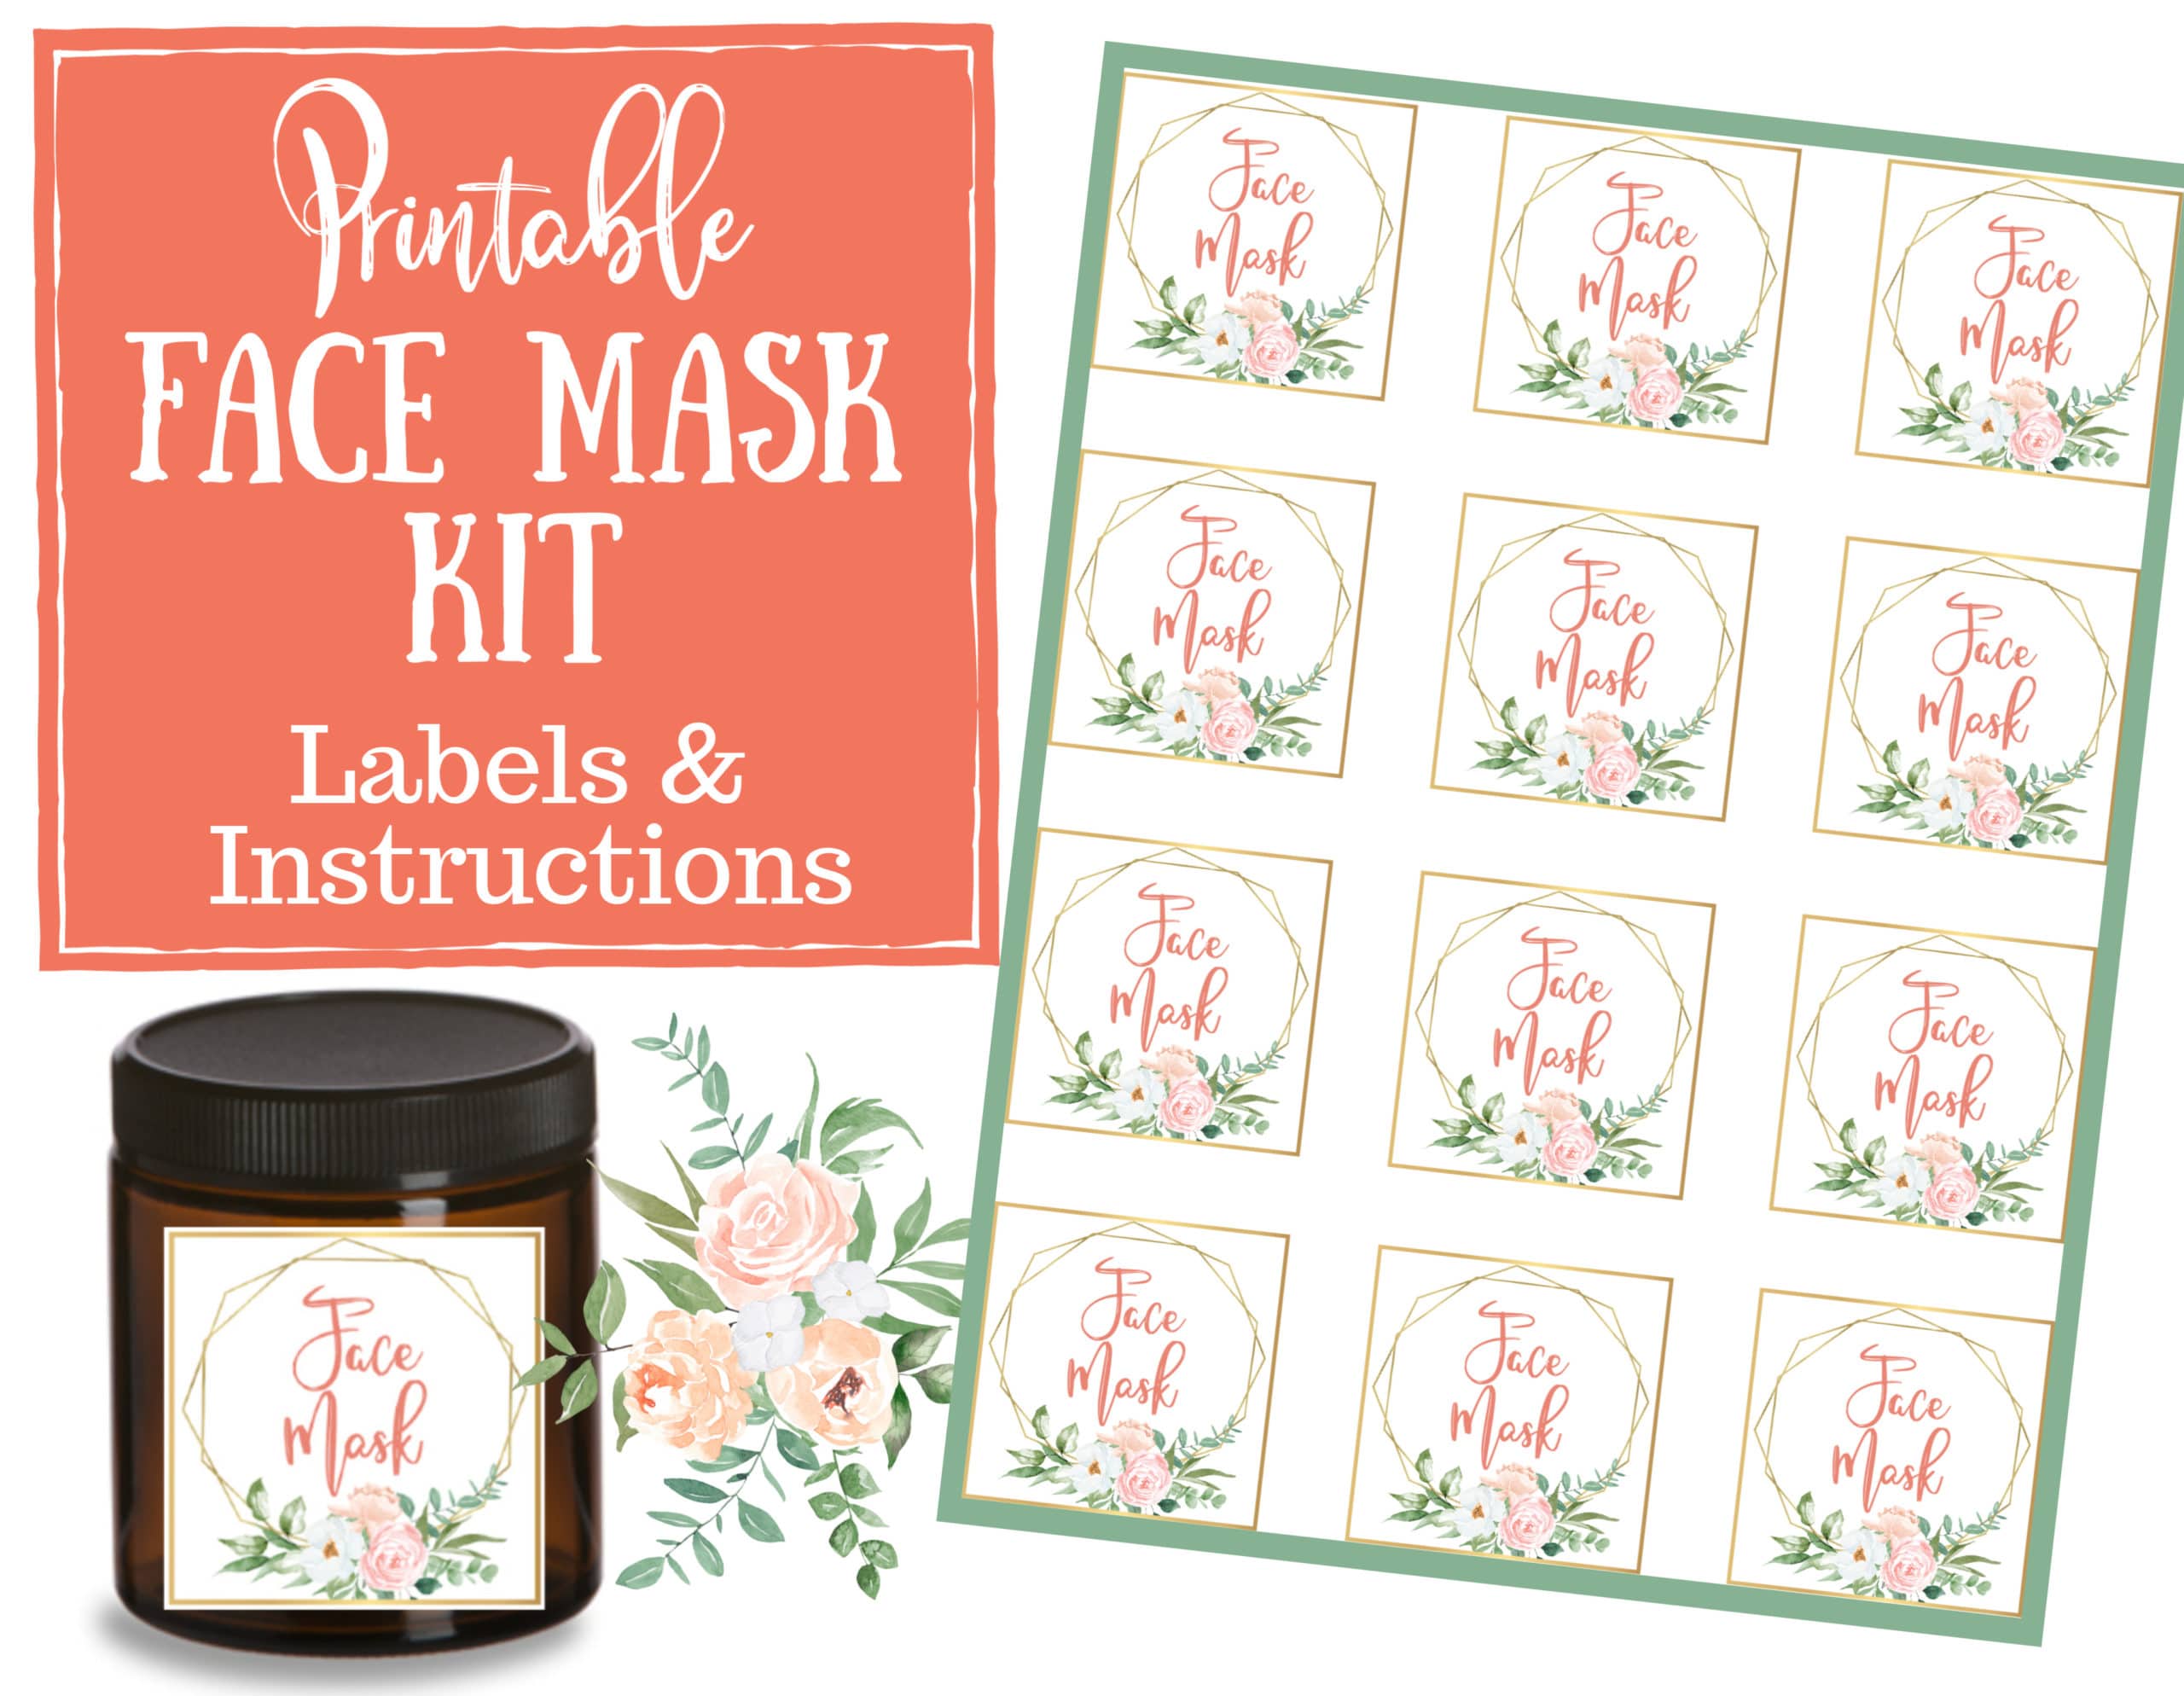 Printable Face Mask Kit - Labels, Recipe and Shopping List included for Bentonite Clay and Apple Cider Vinegar Mask